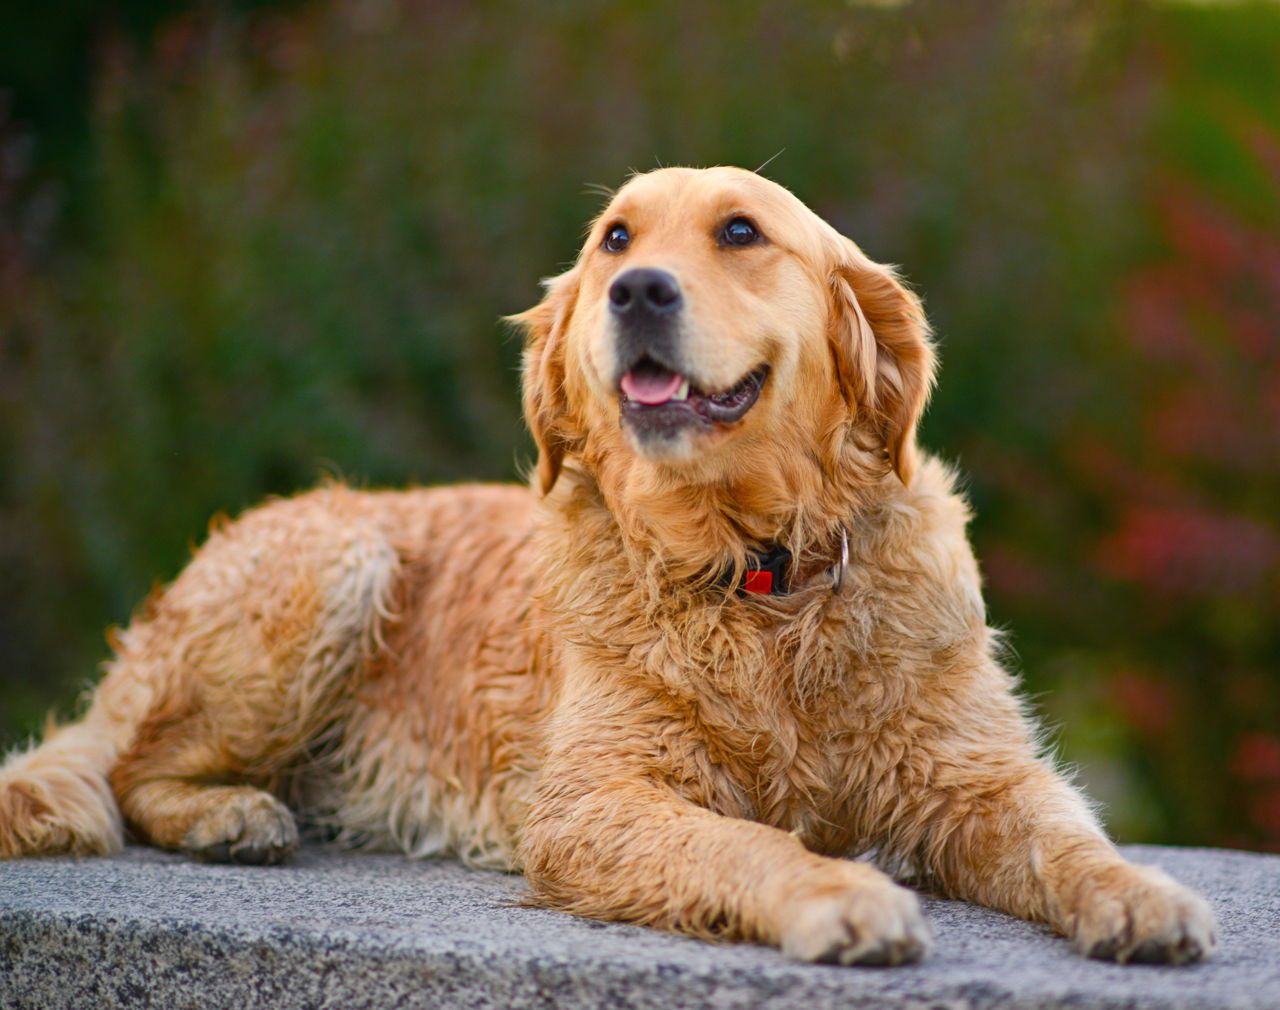 Facts About the Truly Amazing Golden Retriever